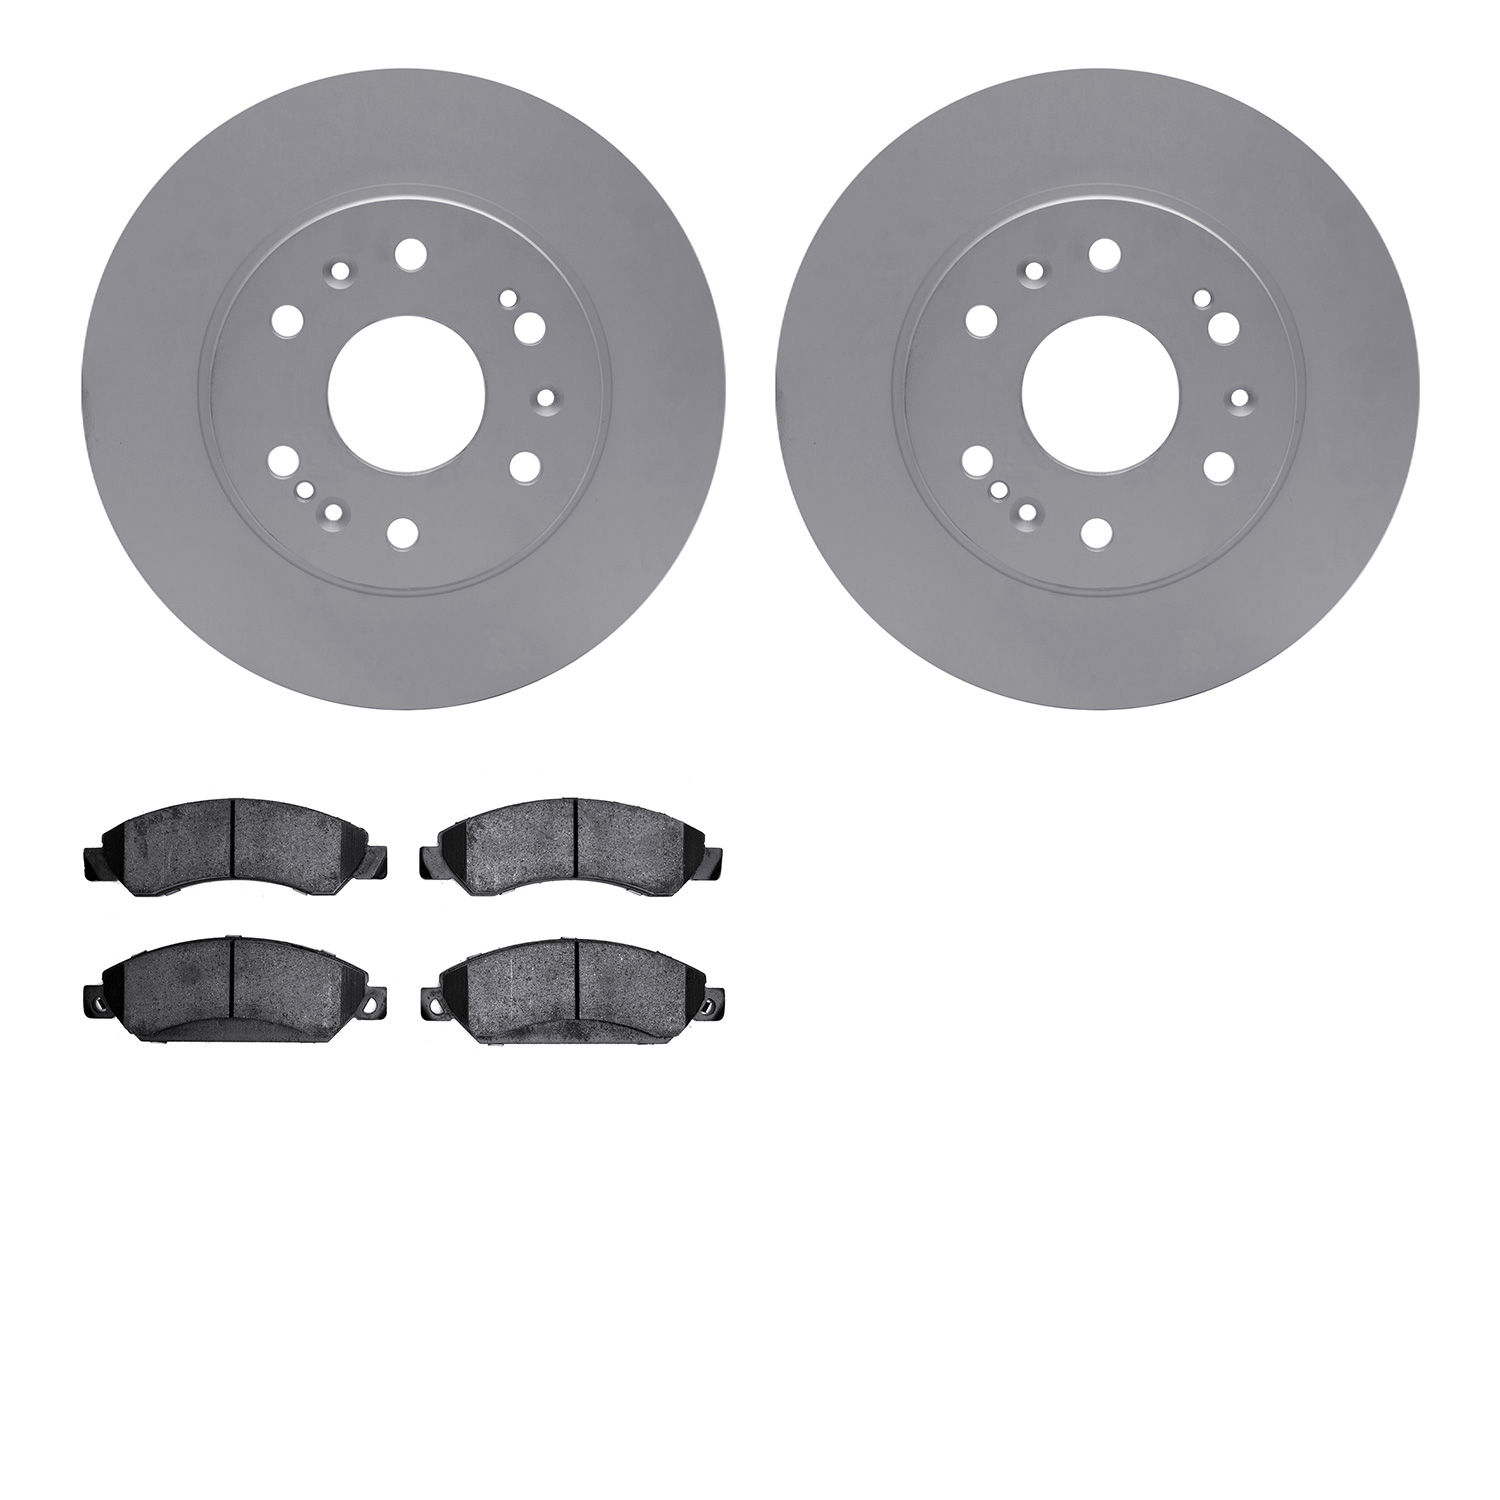 4402-48022 Geospec Brake Rotors with Ultimate-Duty Brake Pads Kit, 2005-2008 GM, Position: Front